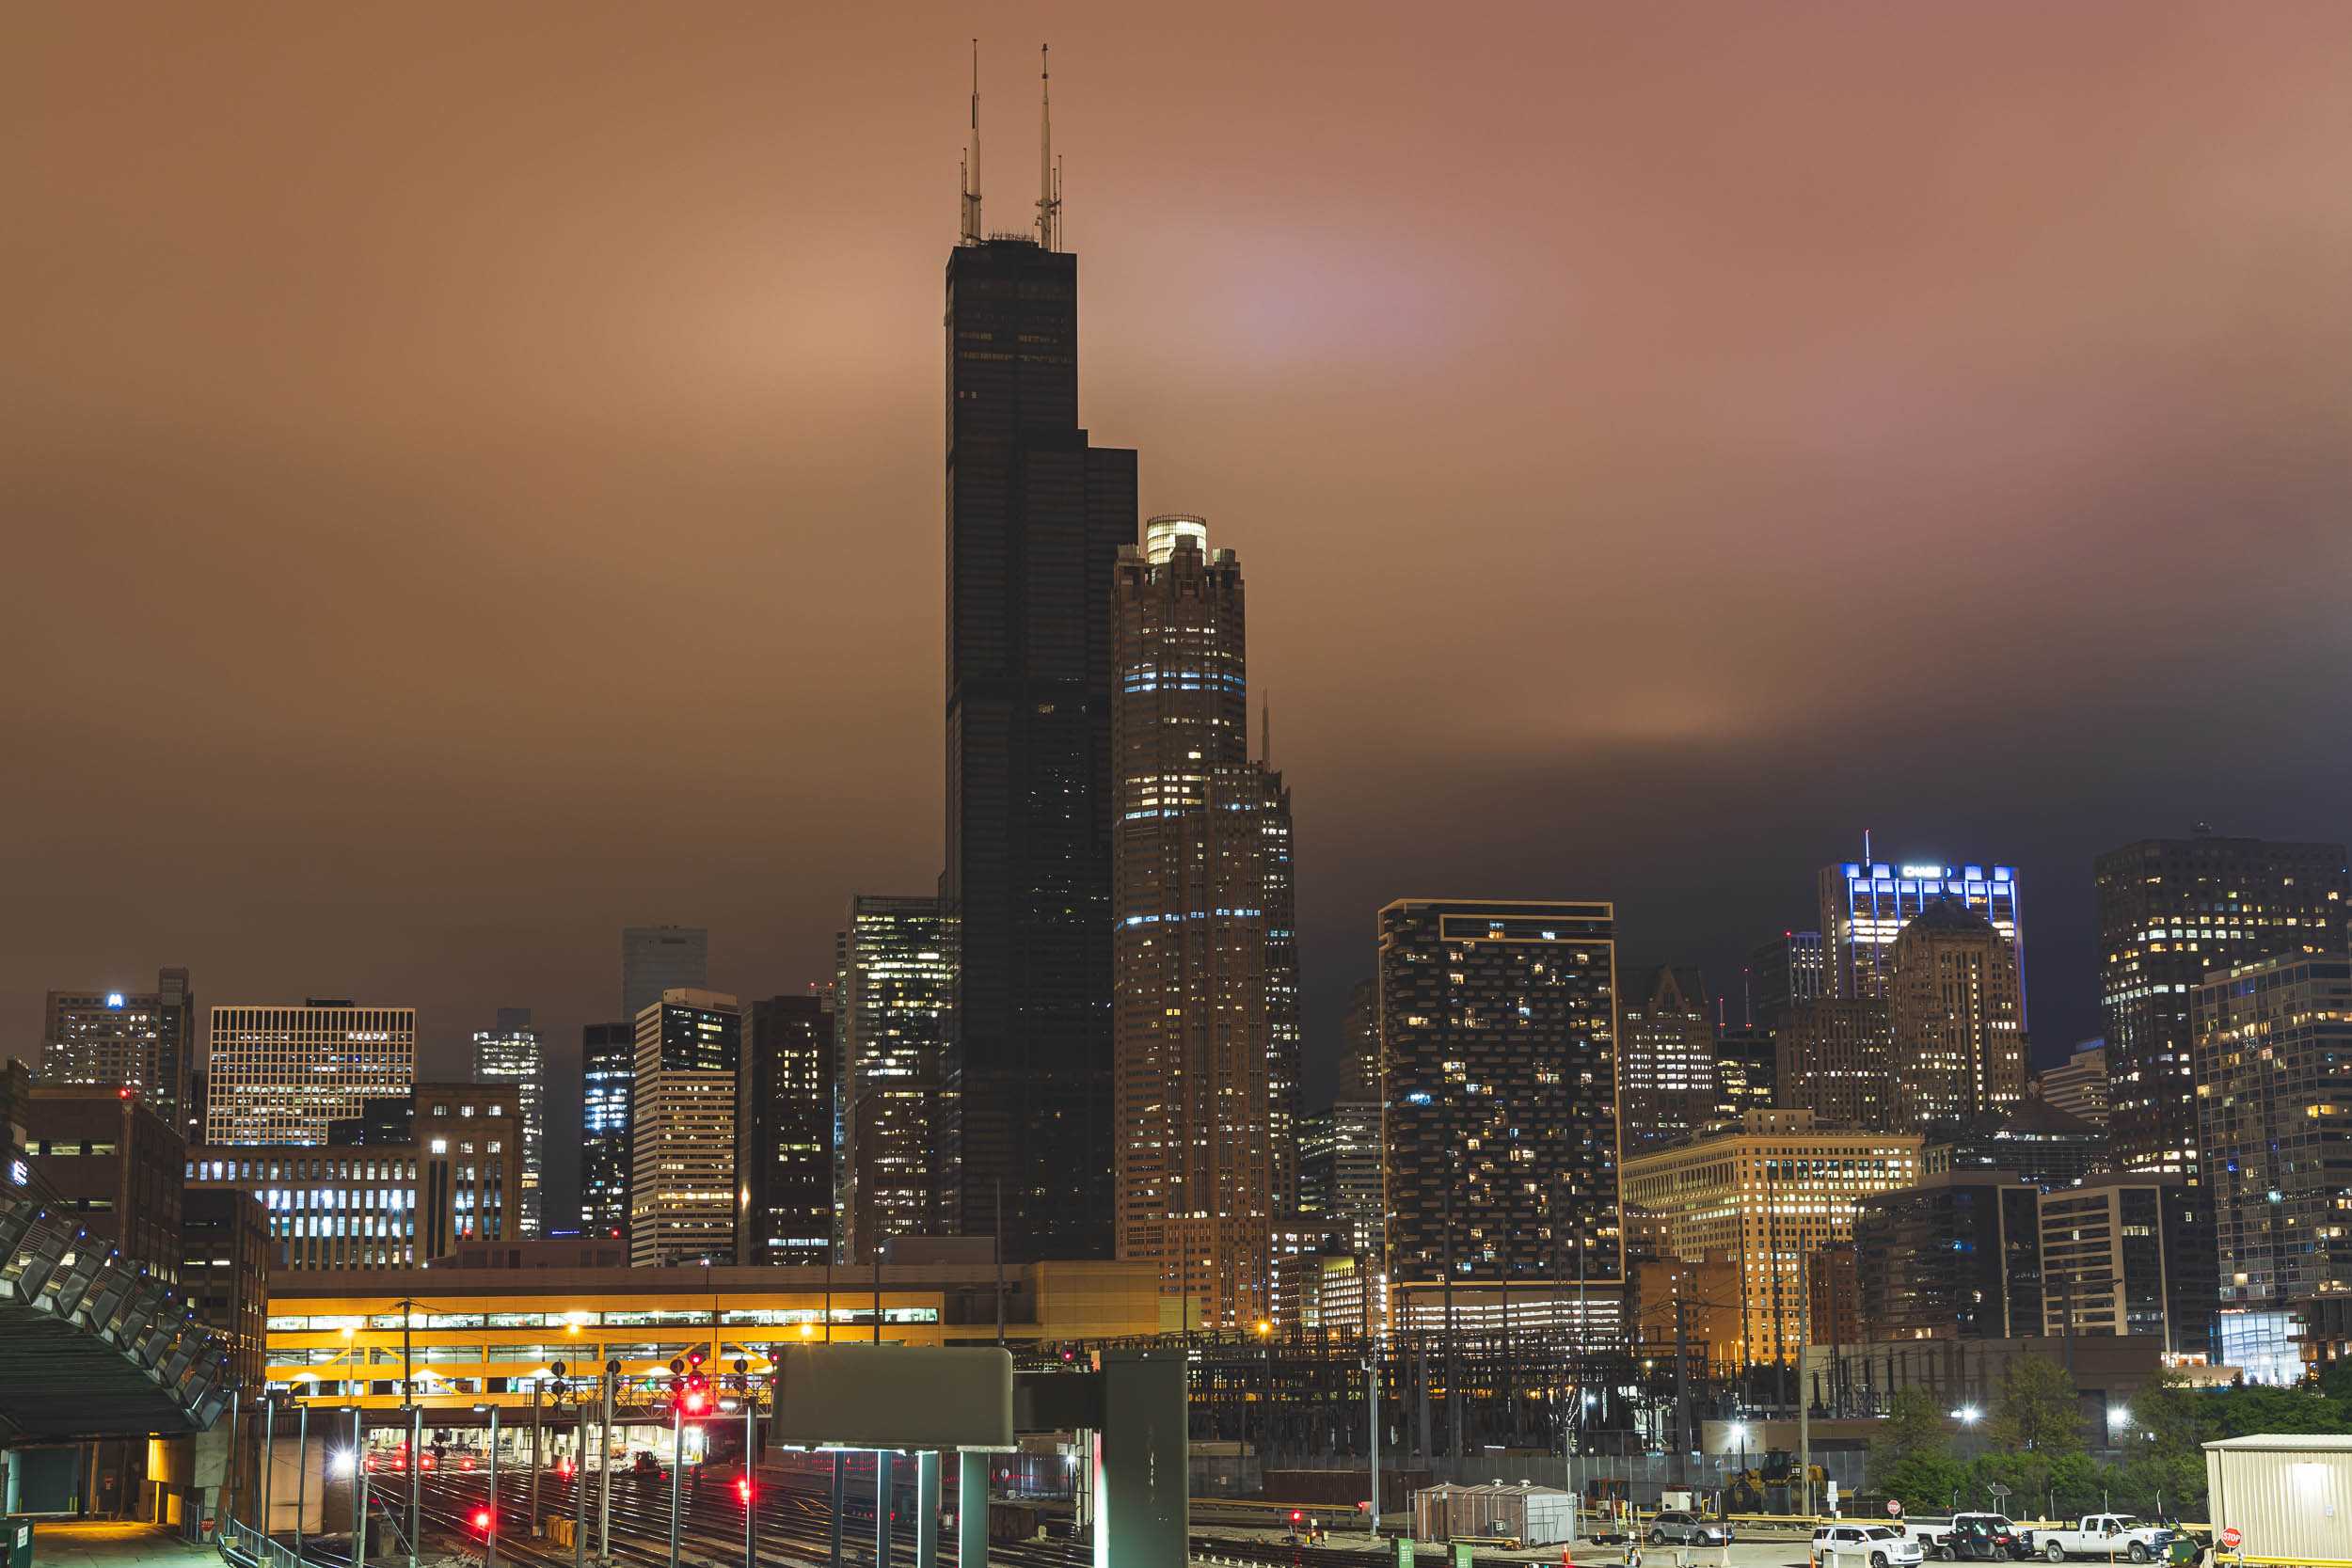 A photo of the Chicago skyline featuring the Sears Tower with no lights on due to a power outage.